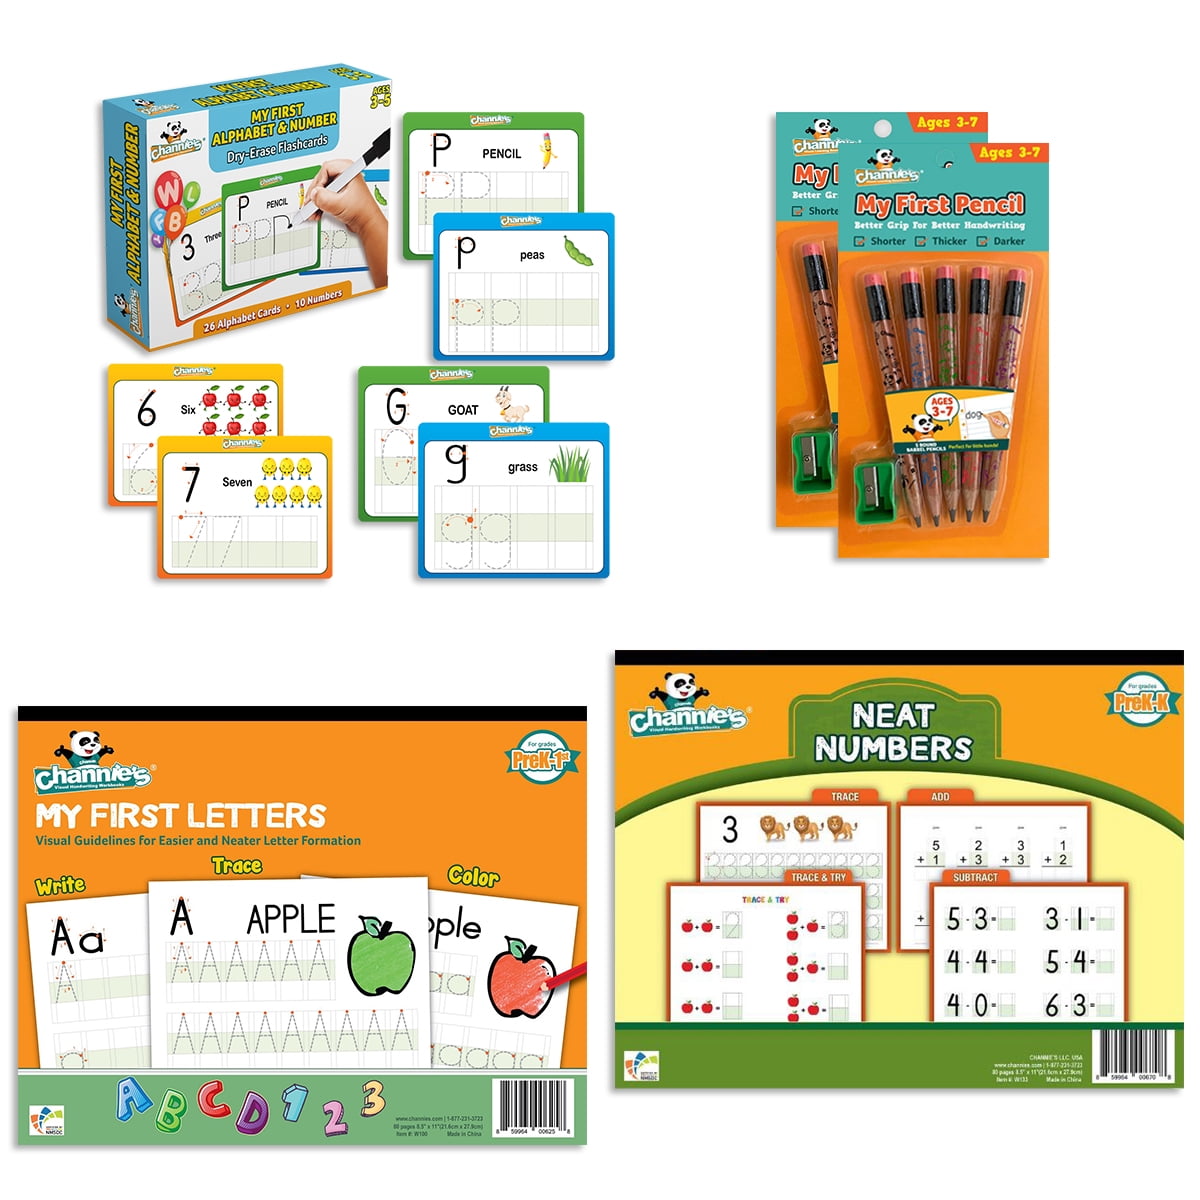 Dysgraphia workbook for kids. Letters handwriting practice.: Writing  exercices: tracing letters, handwriting letters, coloring letters and  matching